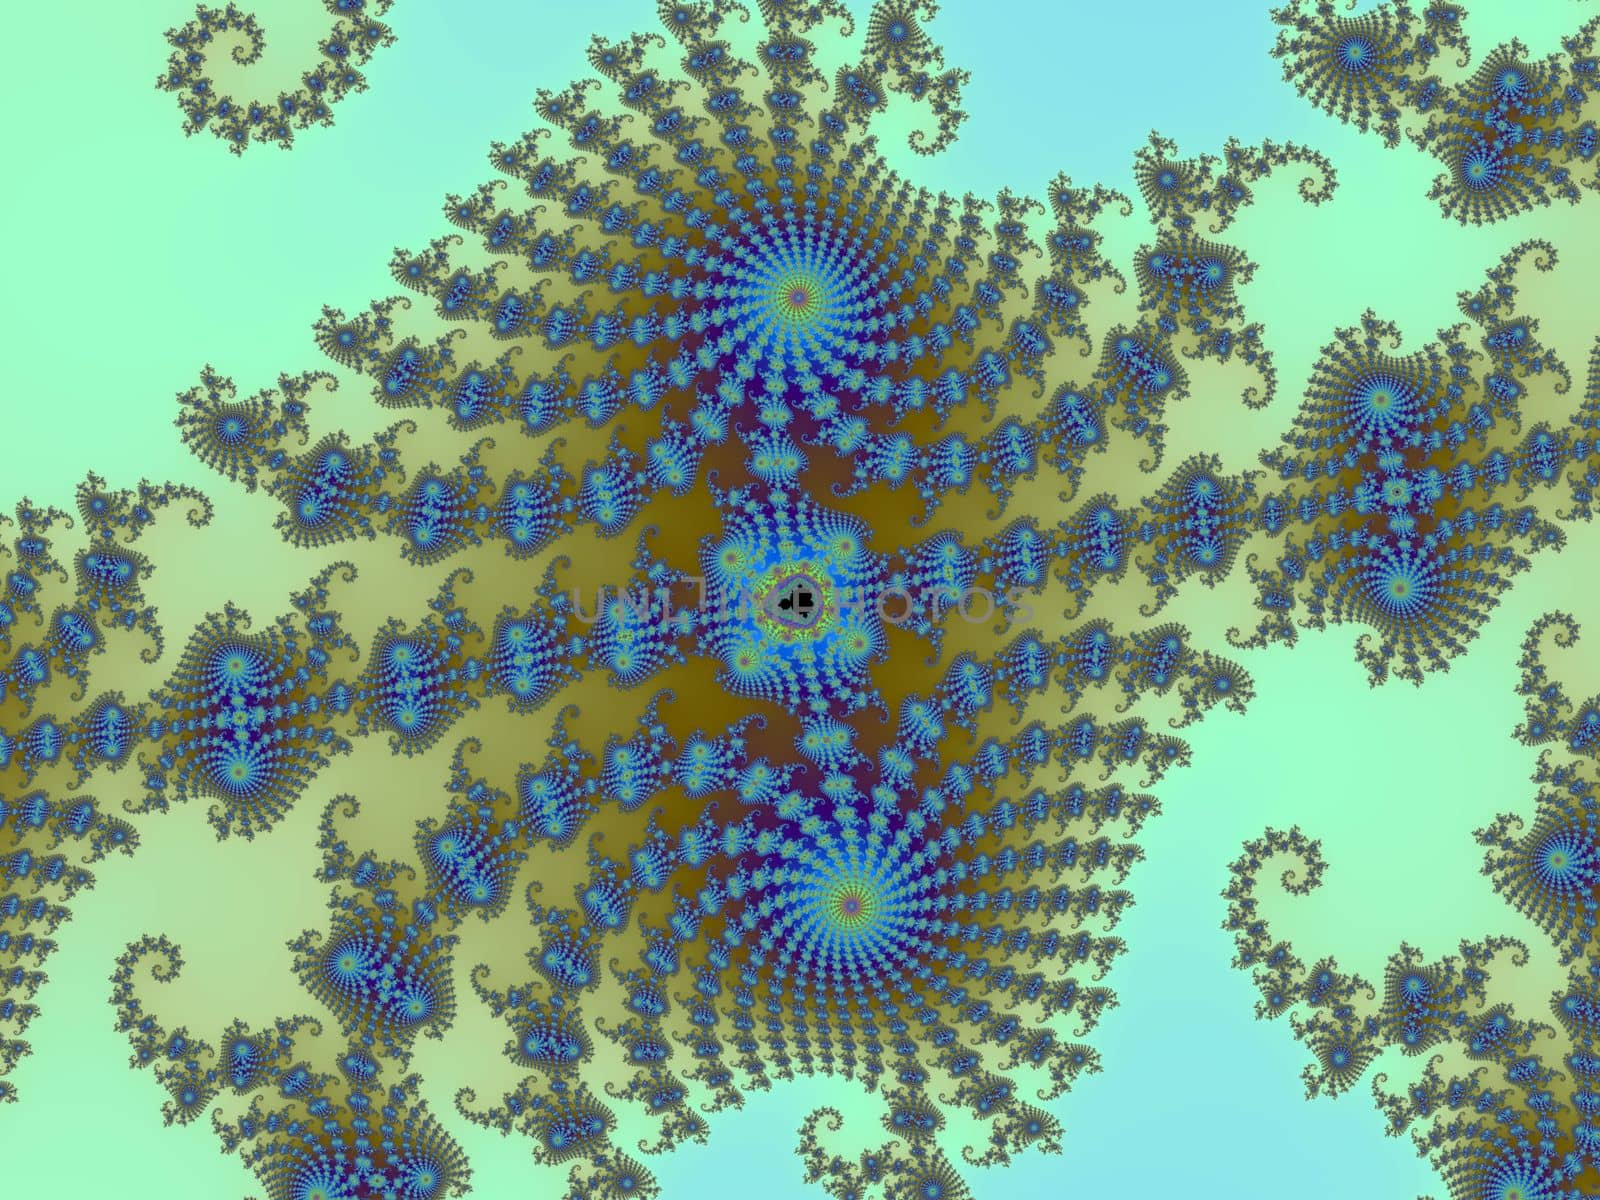 3D-Illustration of a beautiful zoom into the infinite mathematical mandelbrot set fractal. by MP_foto71